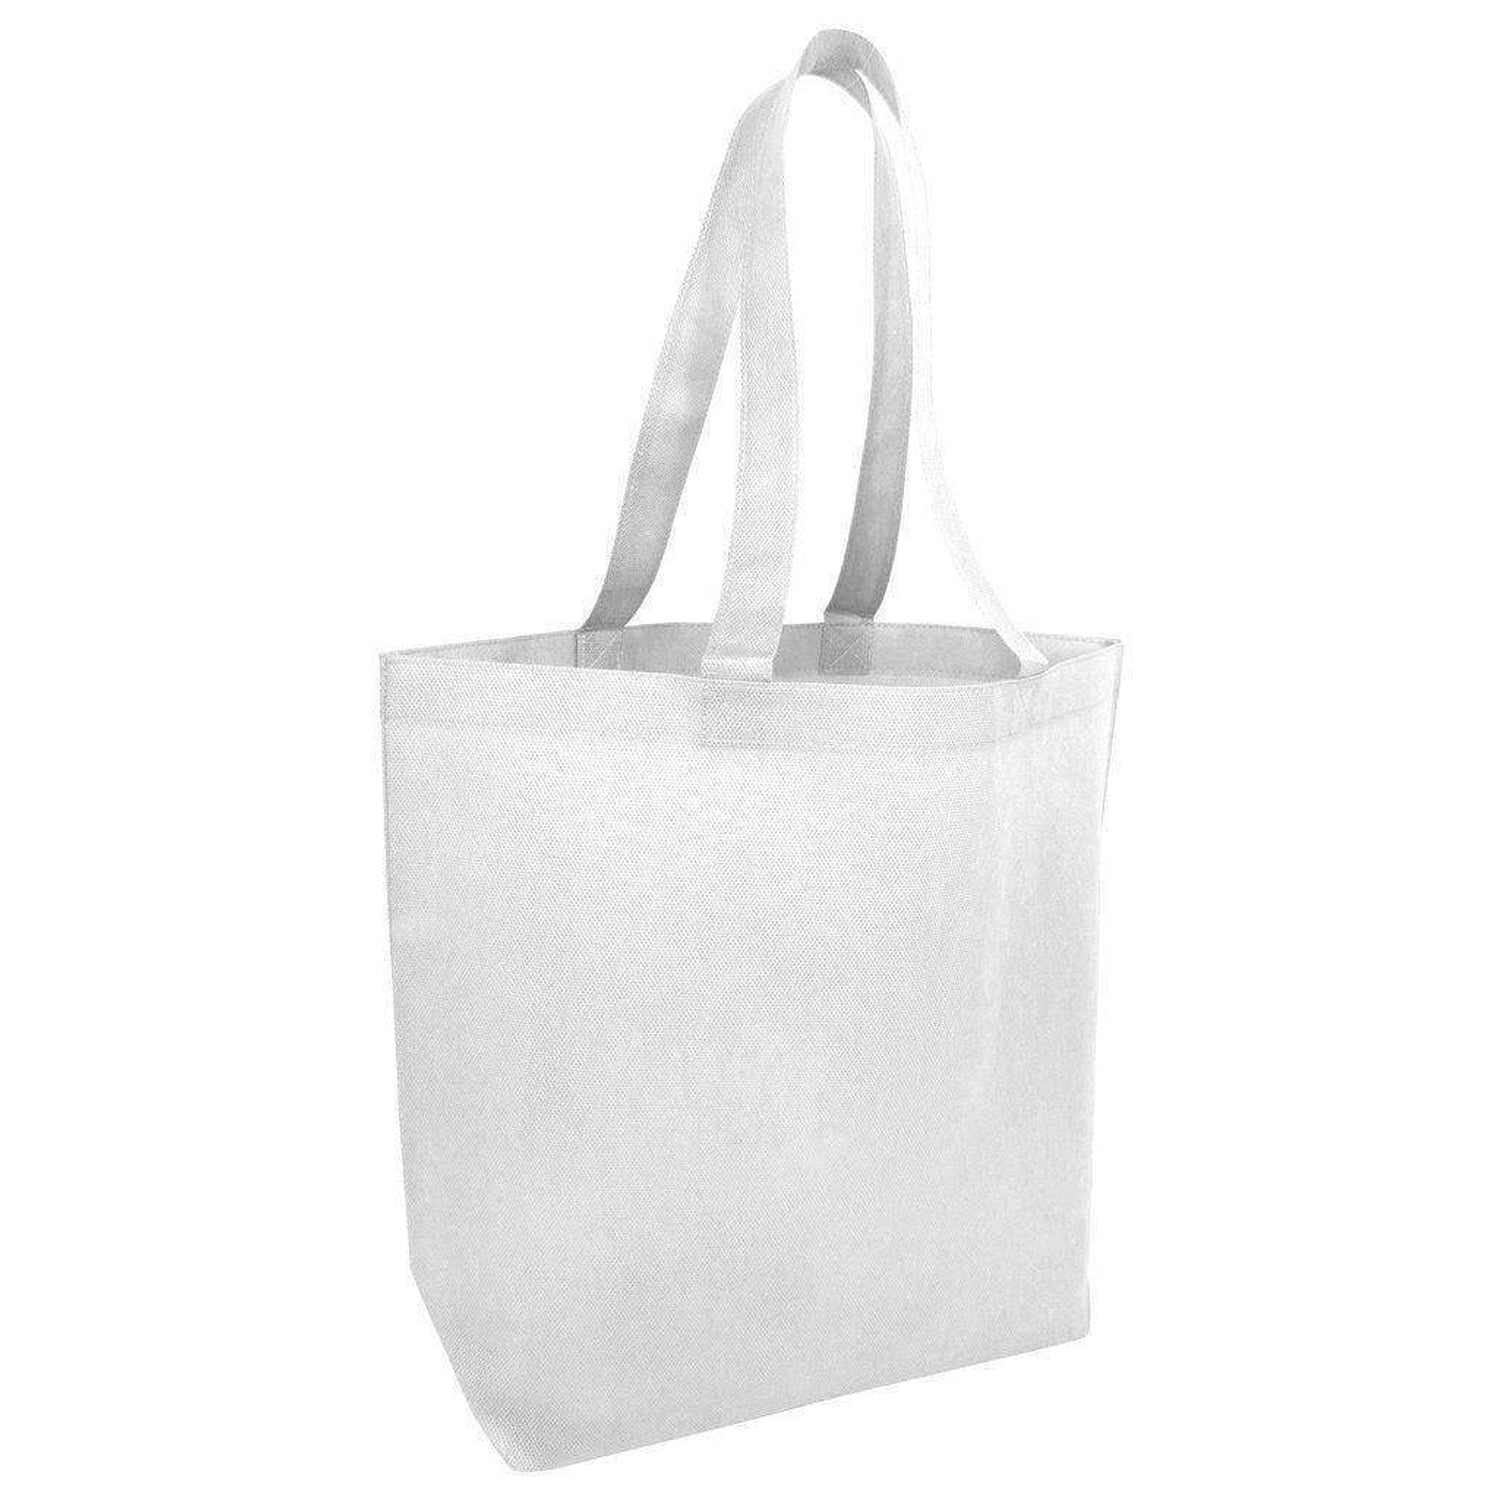 Promotional Non-Woven Large Size Tote Bags with Bottom Gusset - Single ...